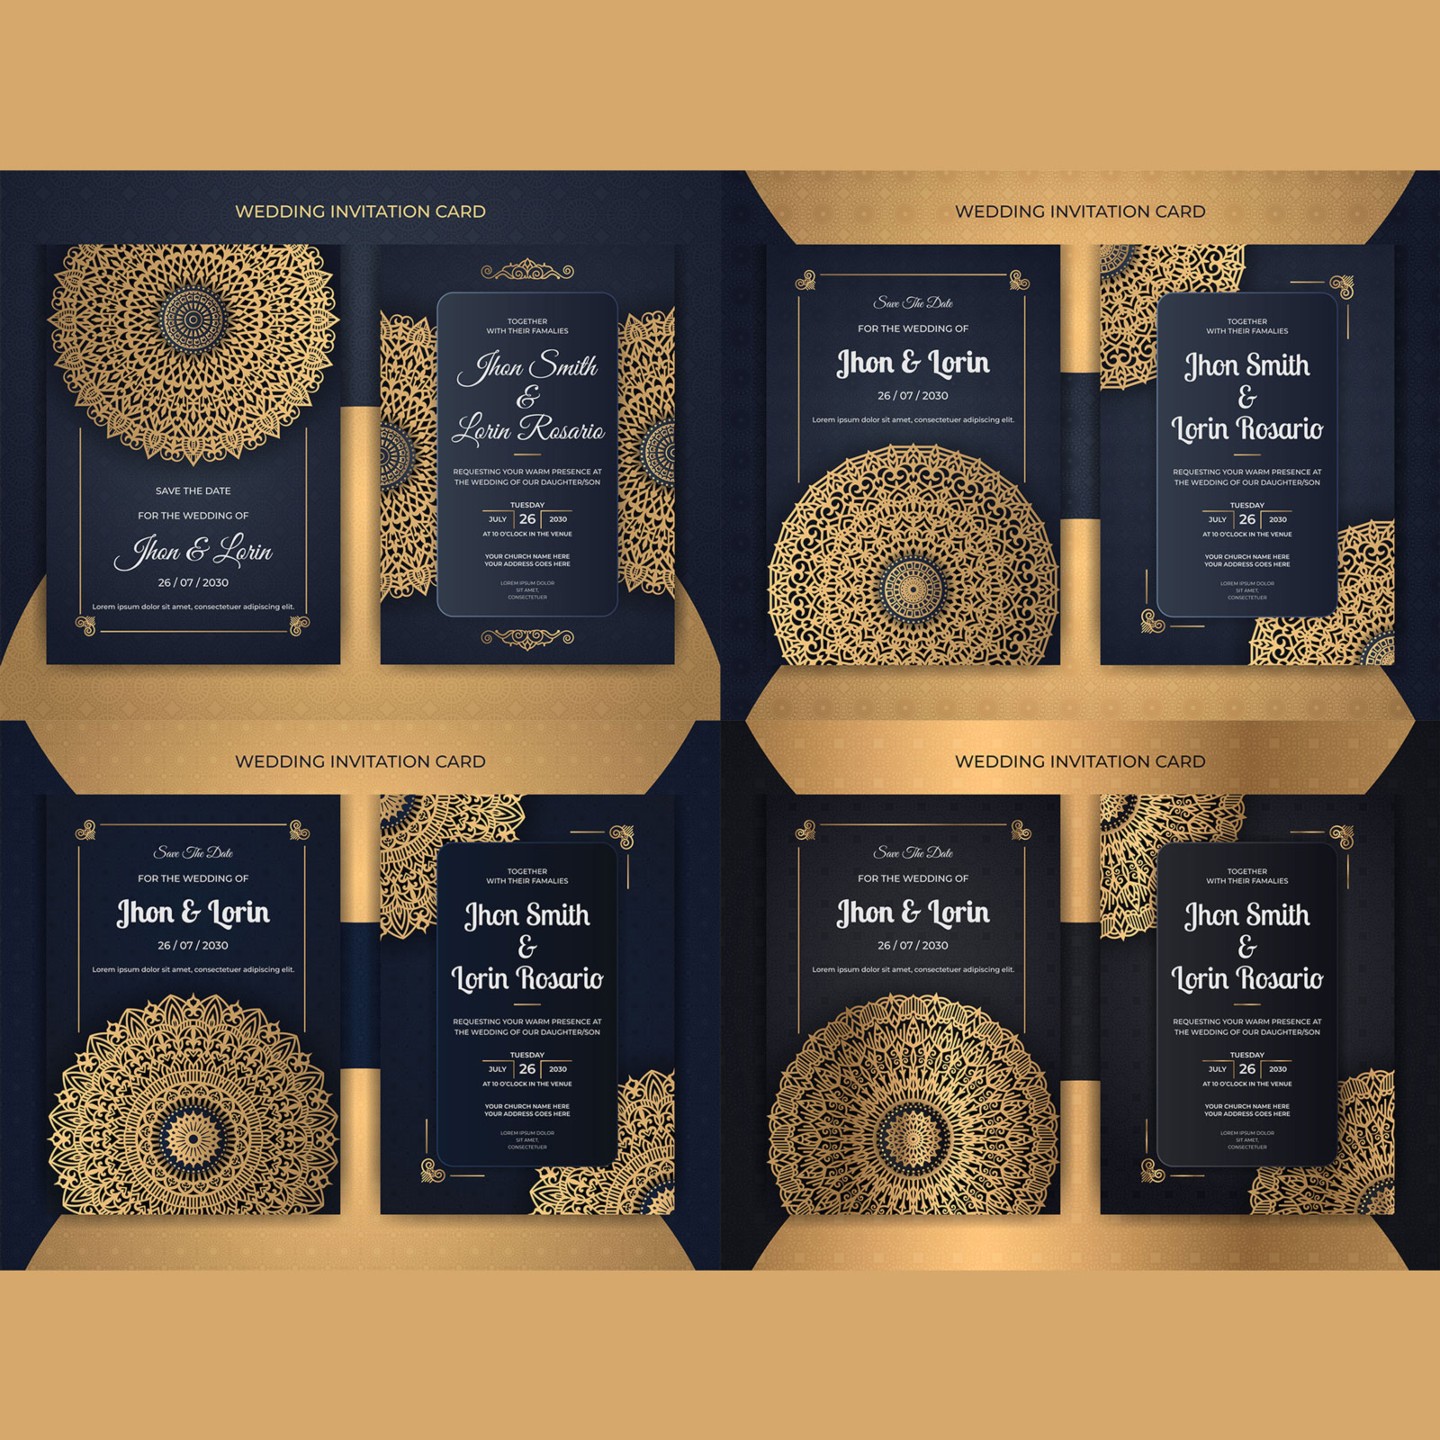 4 In One Royal Luxury Wedding Invitation Card Only In $7 preview image.